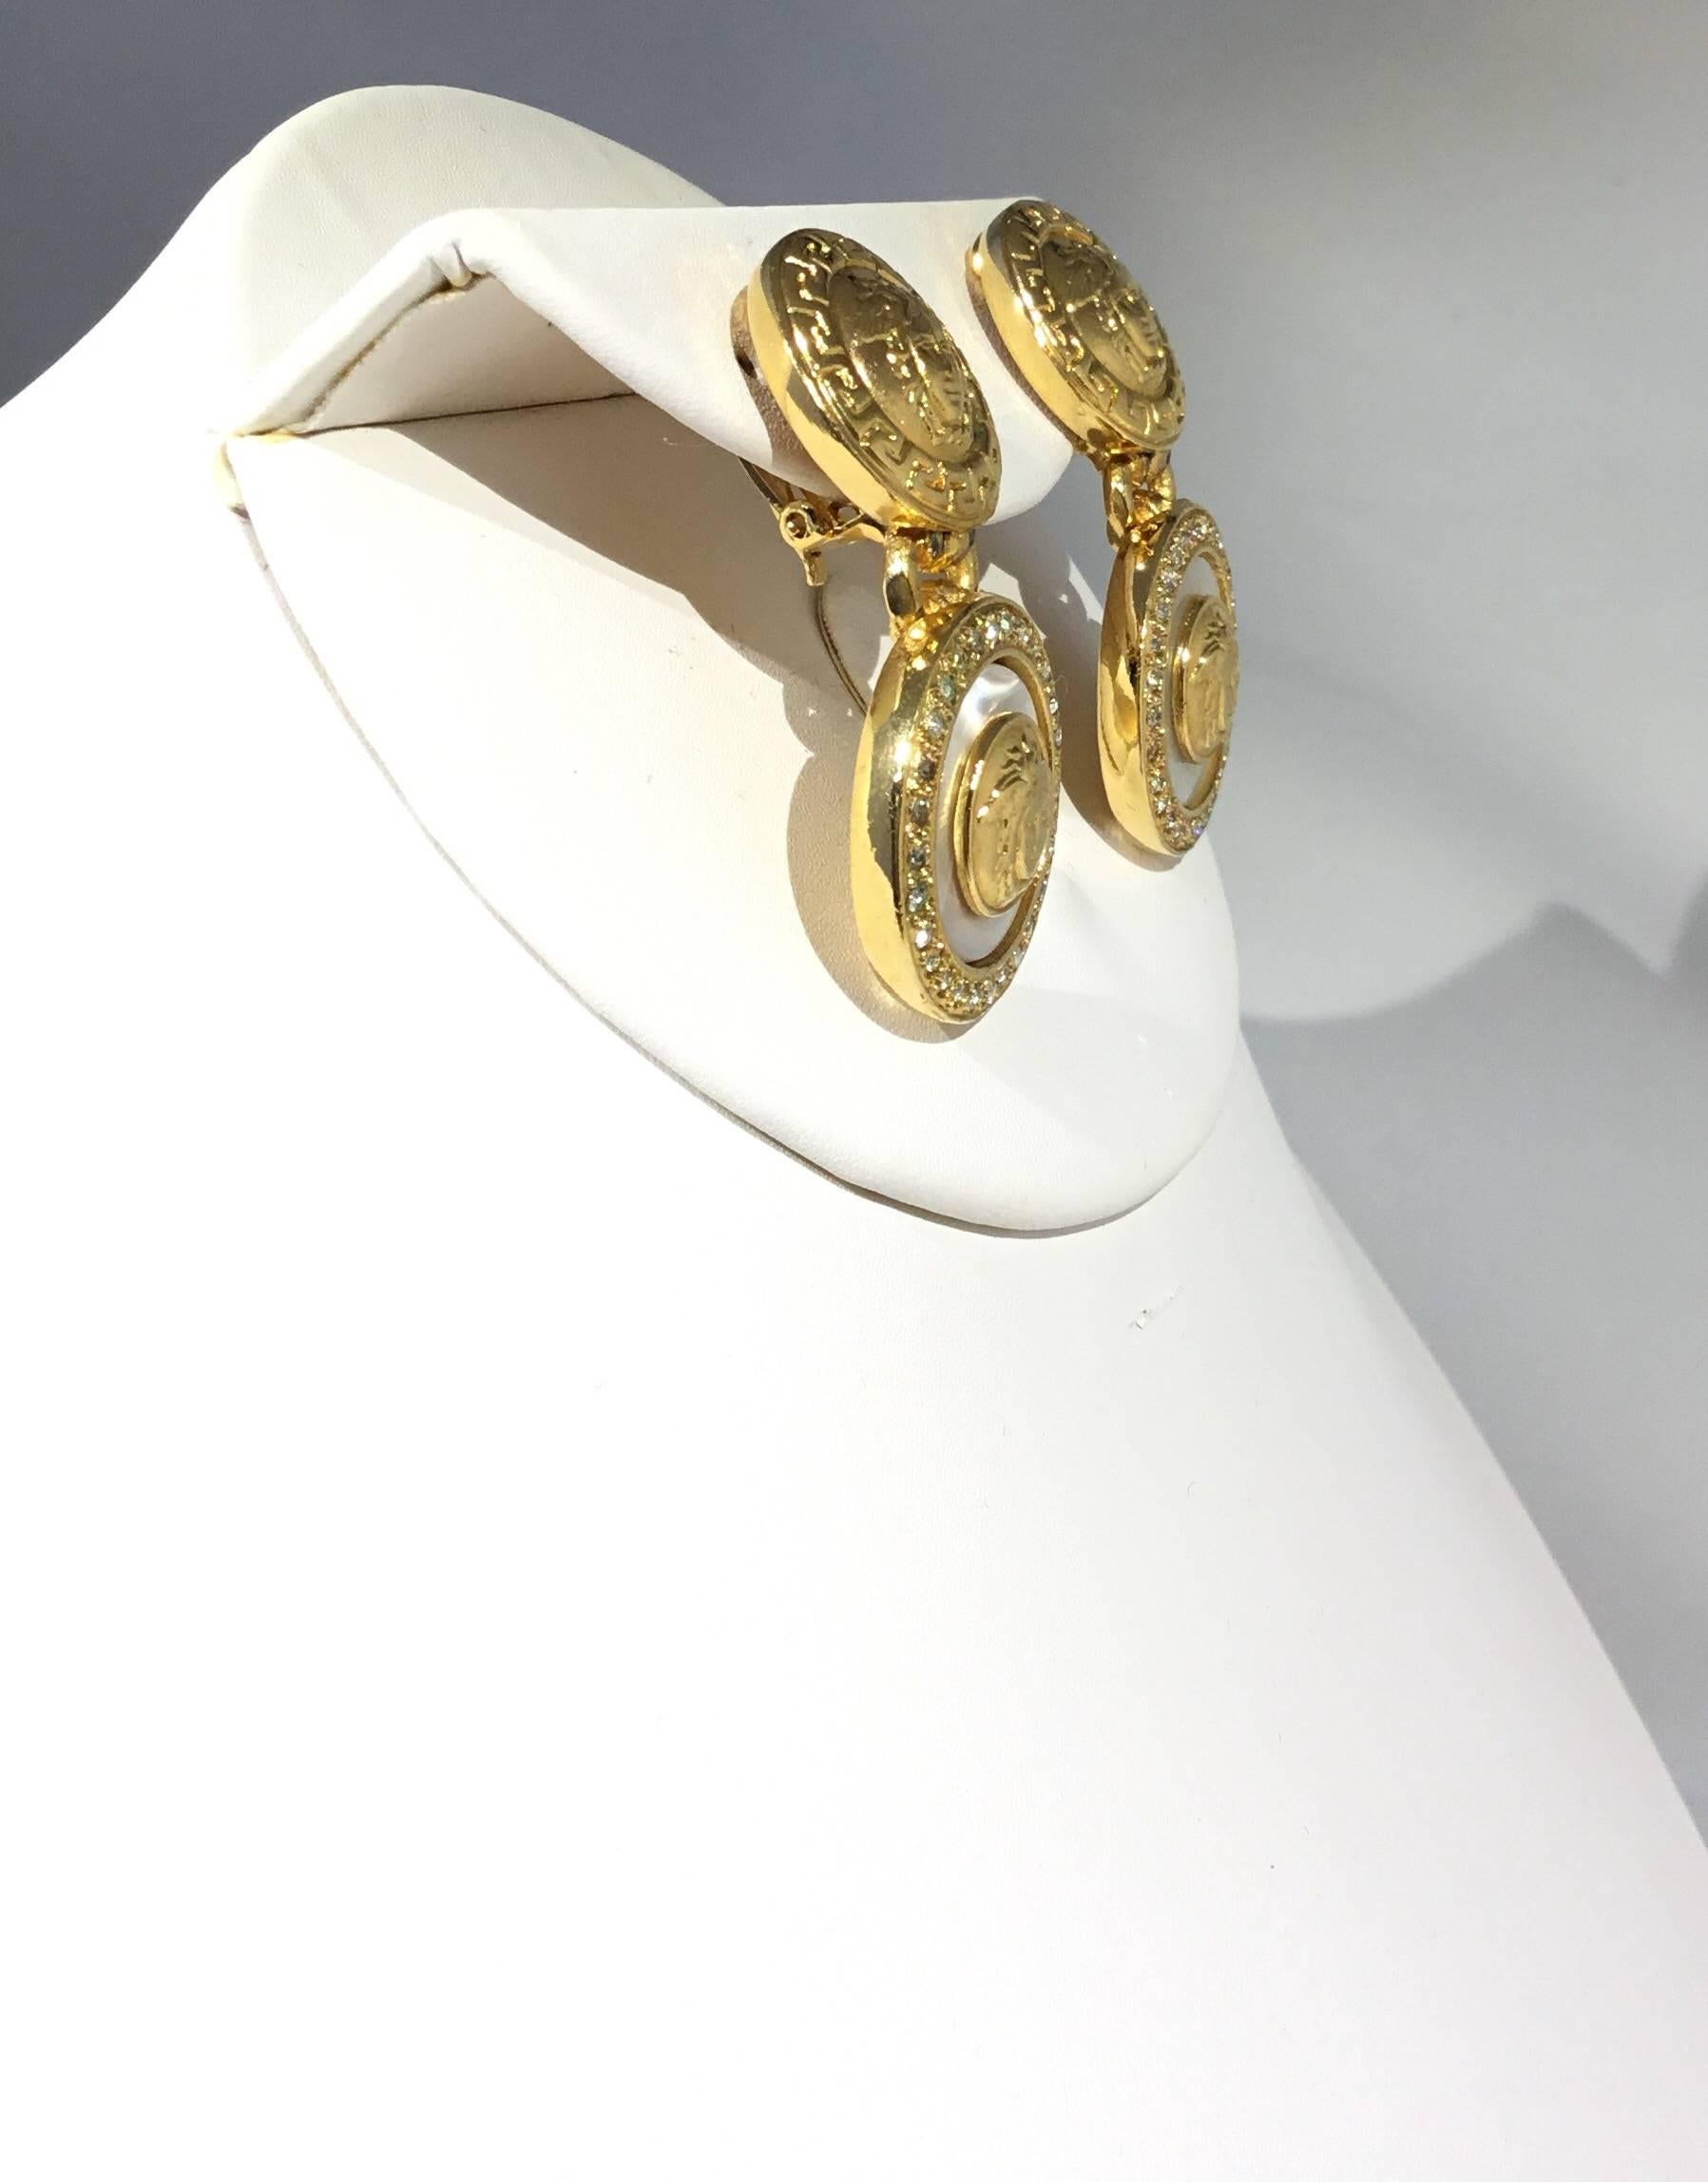 Gianni Versace gold tone clip on earrings featuring a signature Medusa design. Made in Italy, approximately 2 inches long.